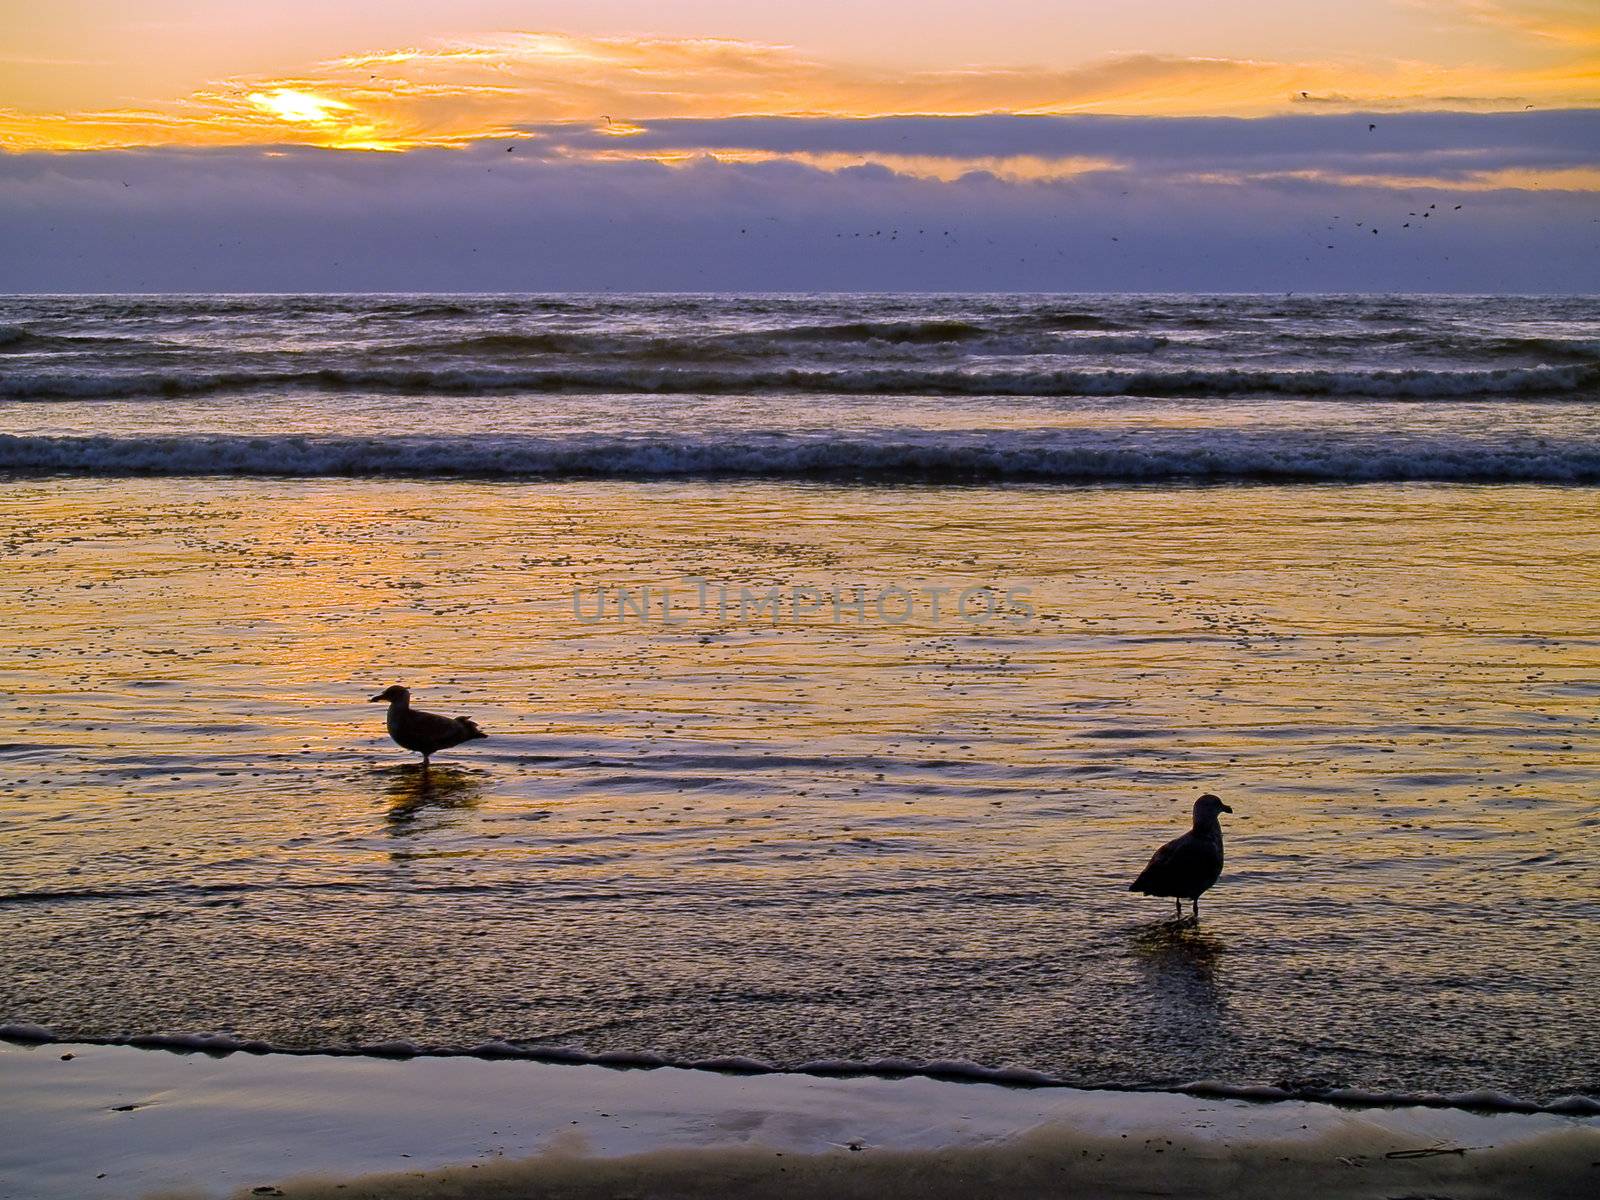 Two Seagulls at the Ocean's Shore at Sunset